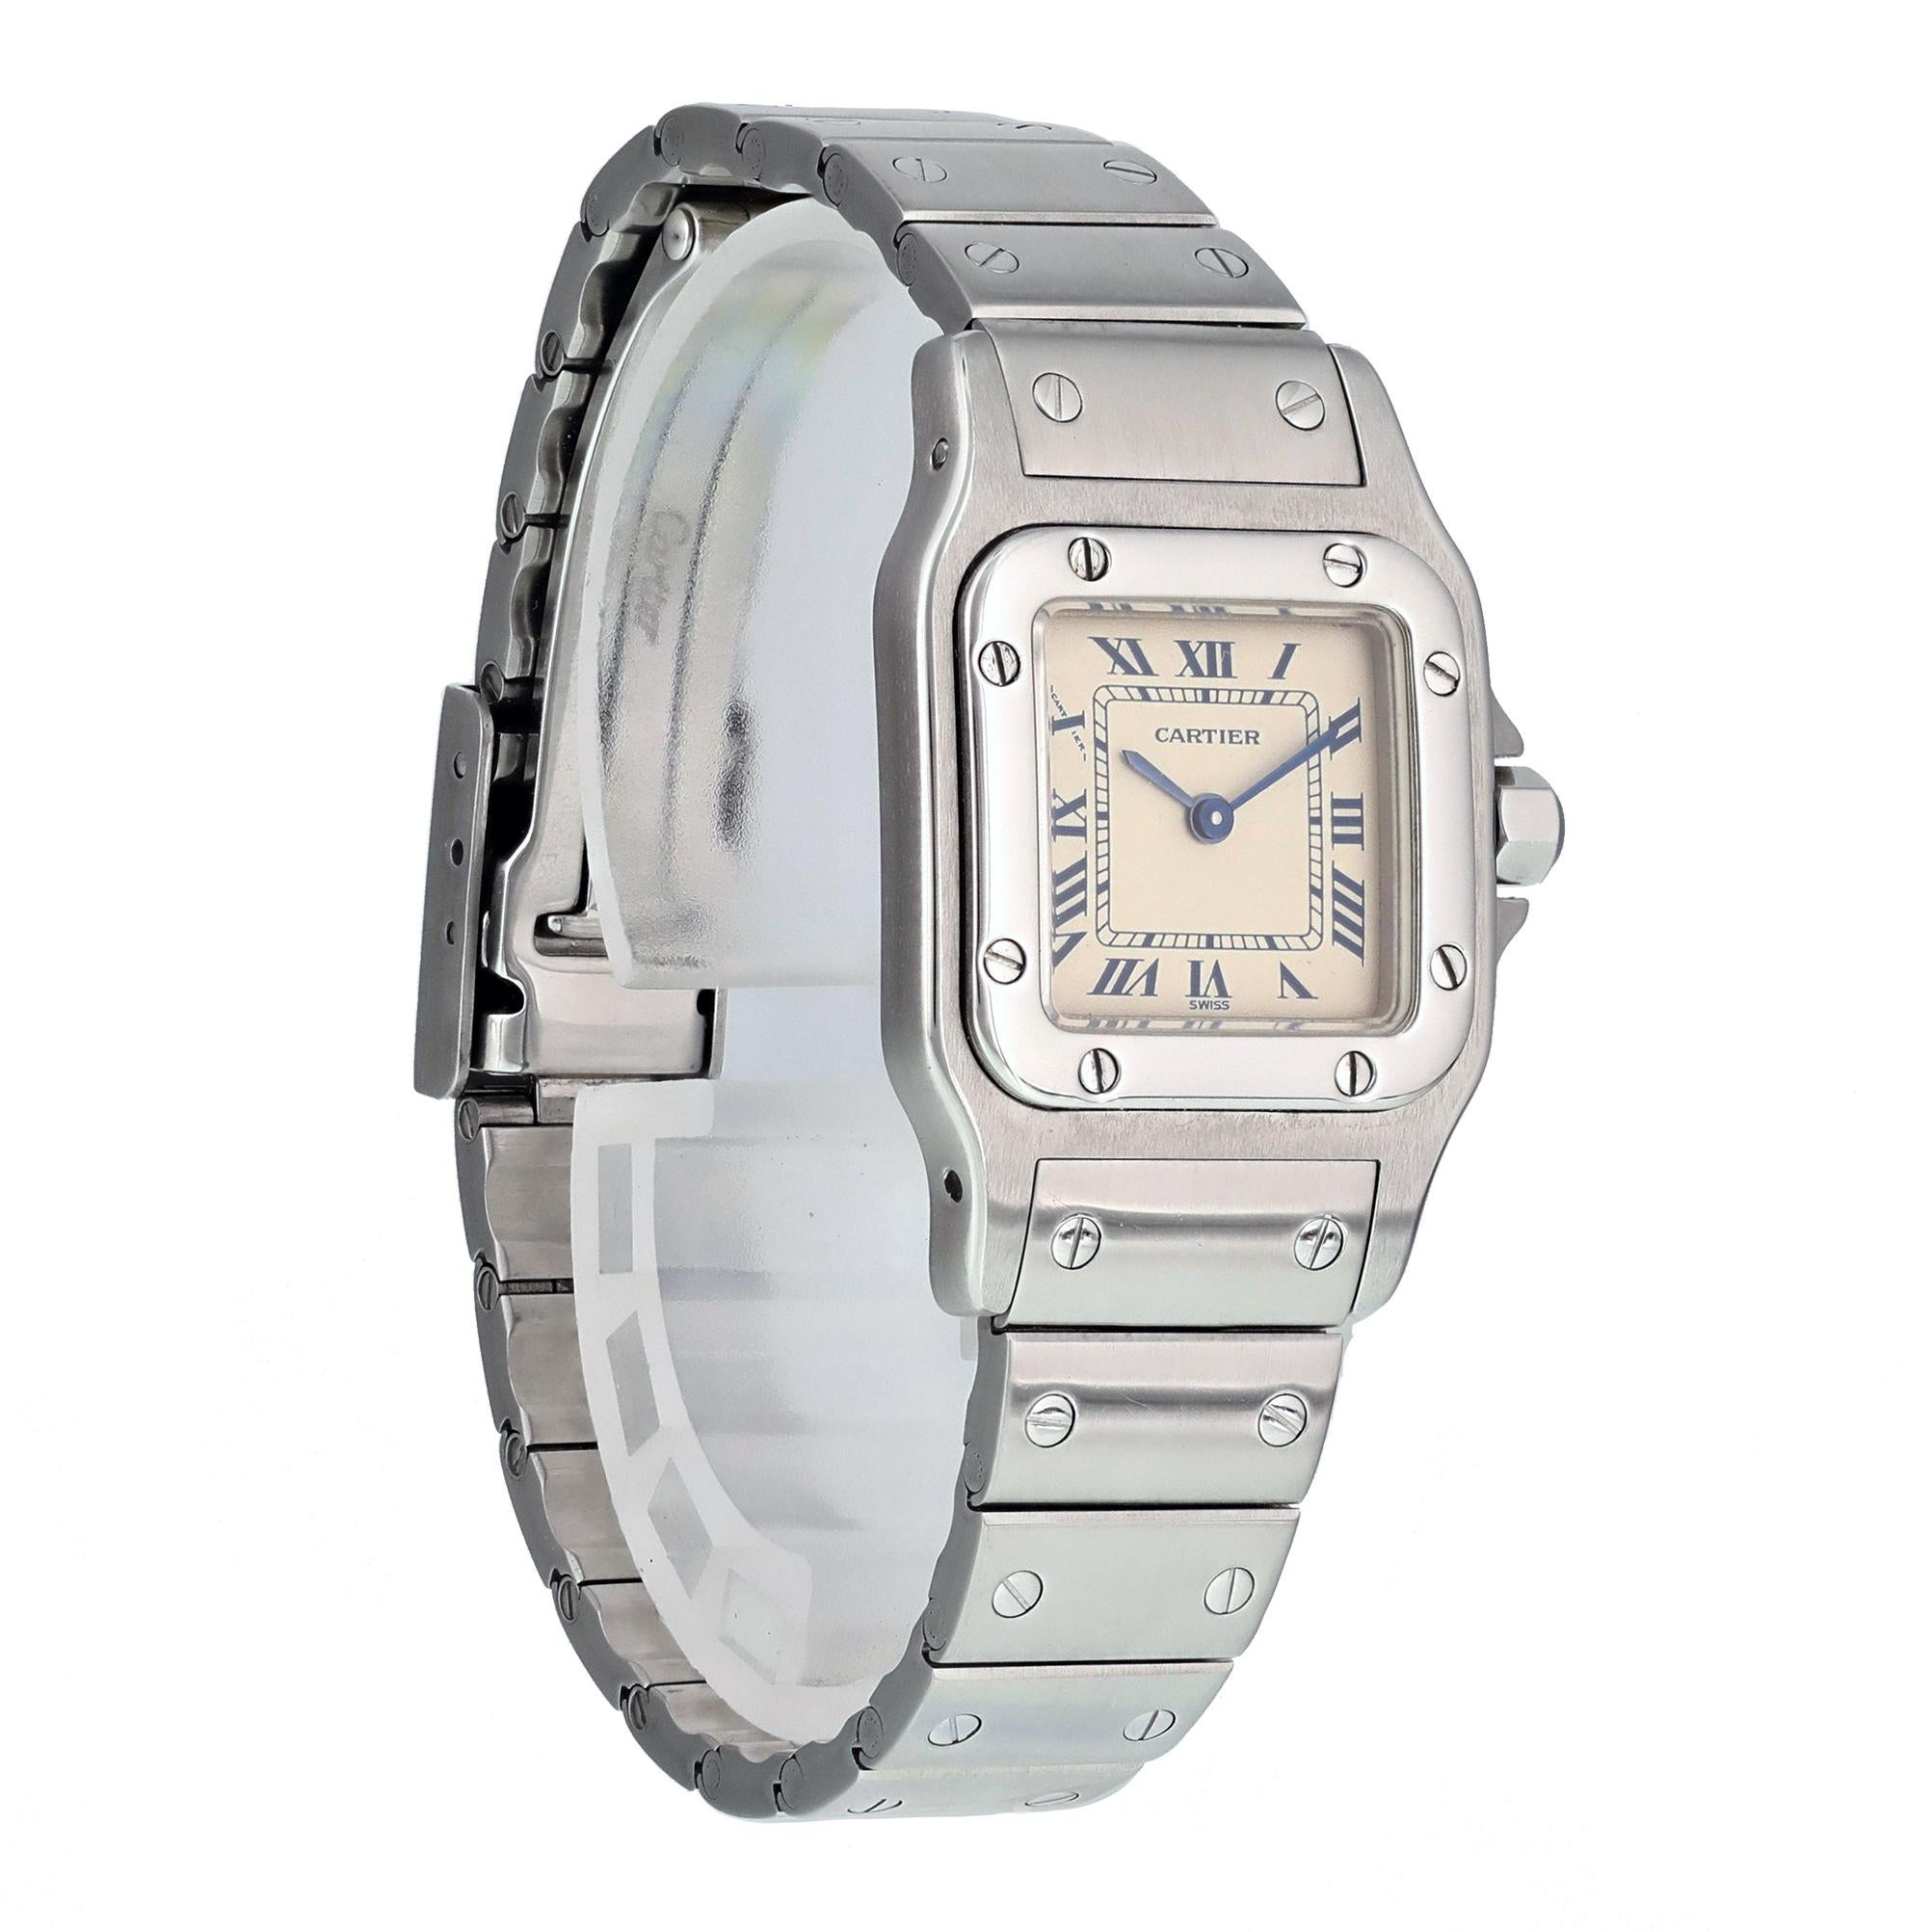 Cartier Santos Galbee 9057930 Ladies Watch In Excellent Condition For Sale In New York, NY